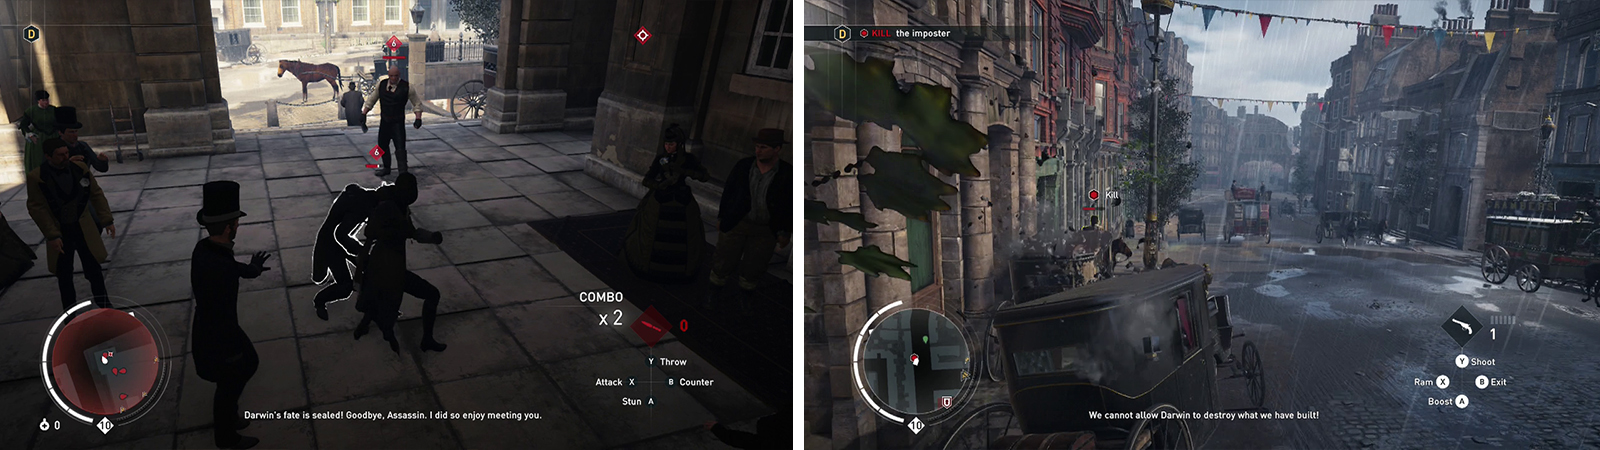 As soon as you exit the station you’ll be attacked (left). Grab a carriage and chase down and kill the target (right).